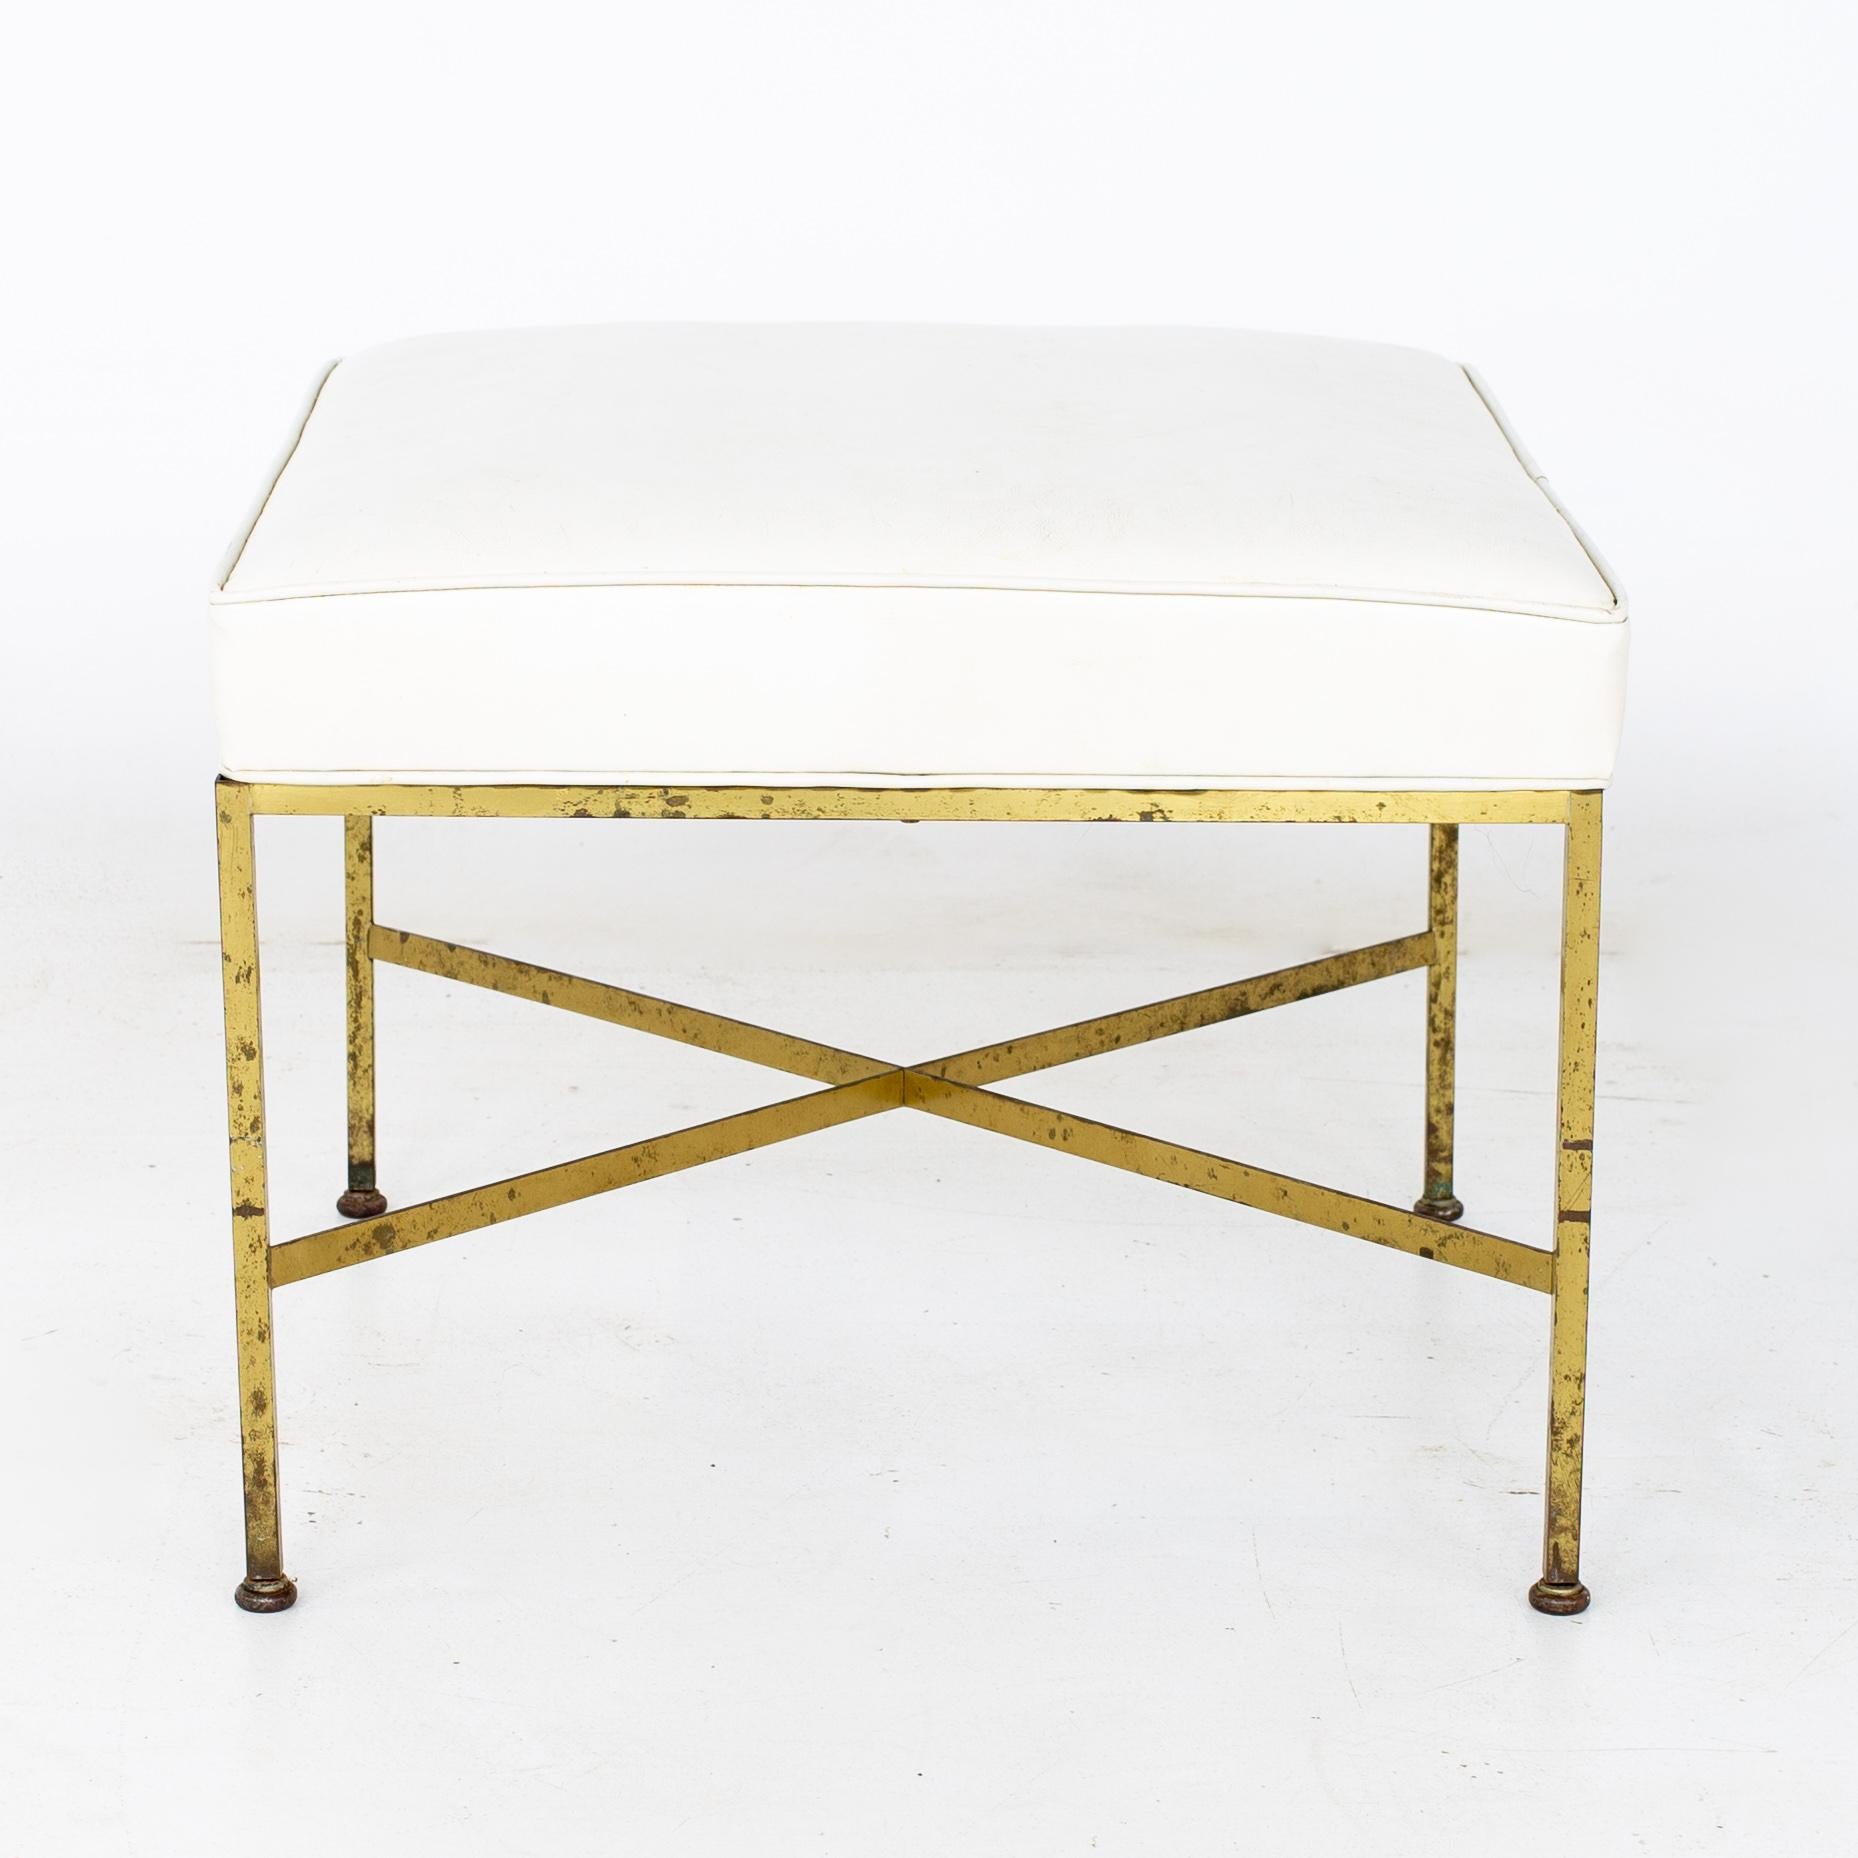 Paul McCobb for Calvin mid century brass x base stool ottoman.

Stool measures: 20 wide x 20 deep x 15.5 inches high.

All pieces of furniture can be had in what we call restored vintage condition. That means the piece is restored upon purchase